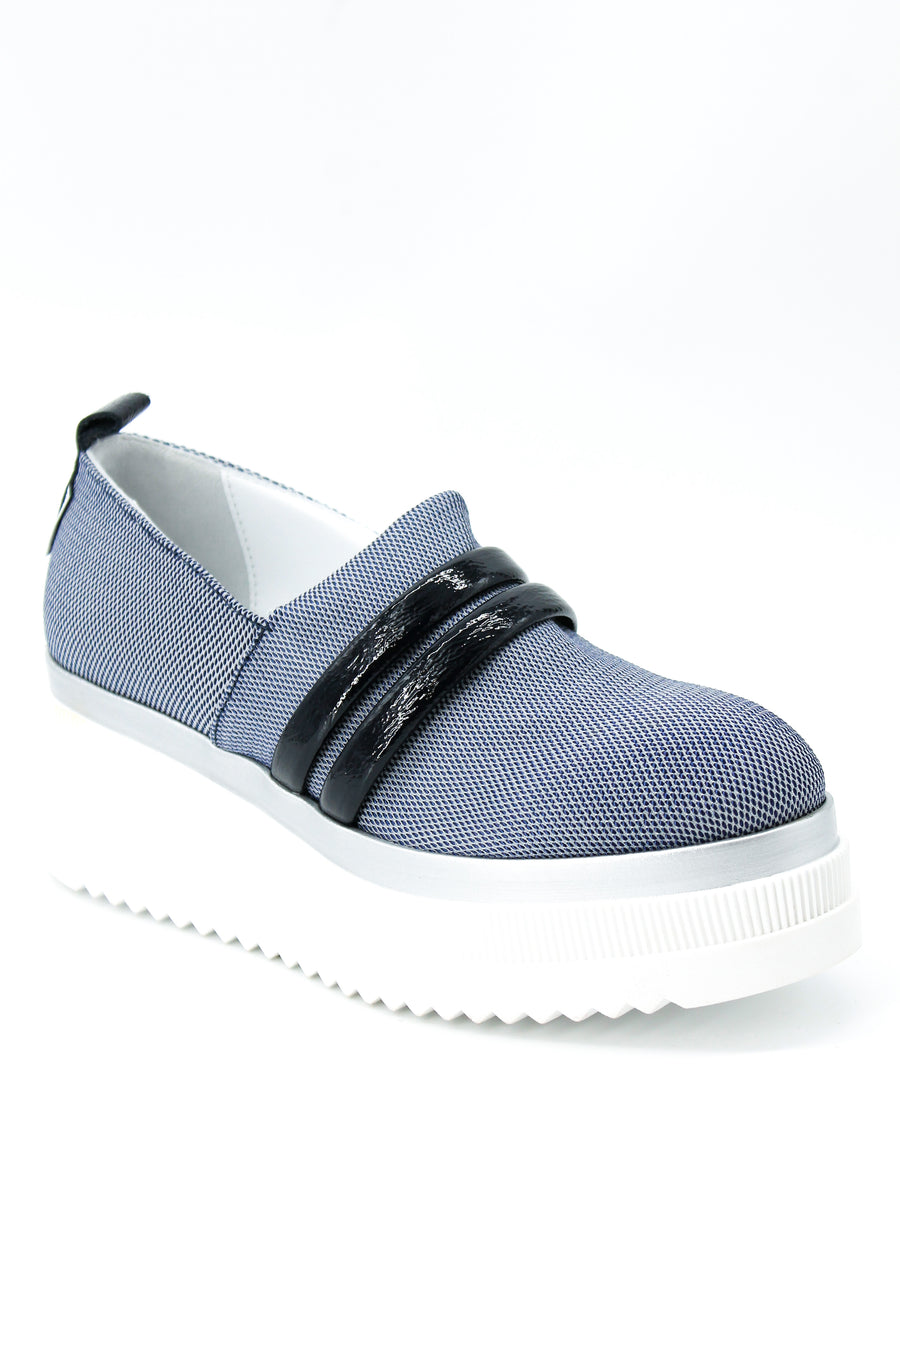 Marco Moreo 3040 Navy and White